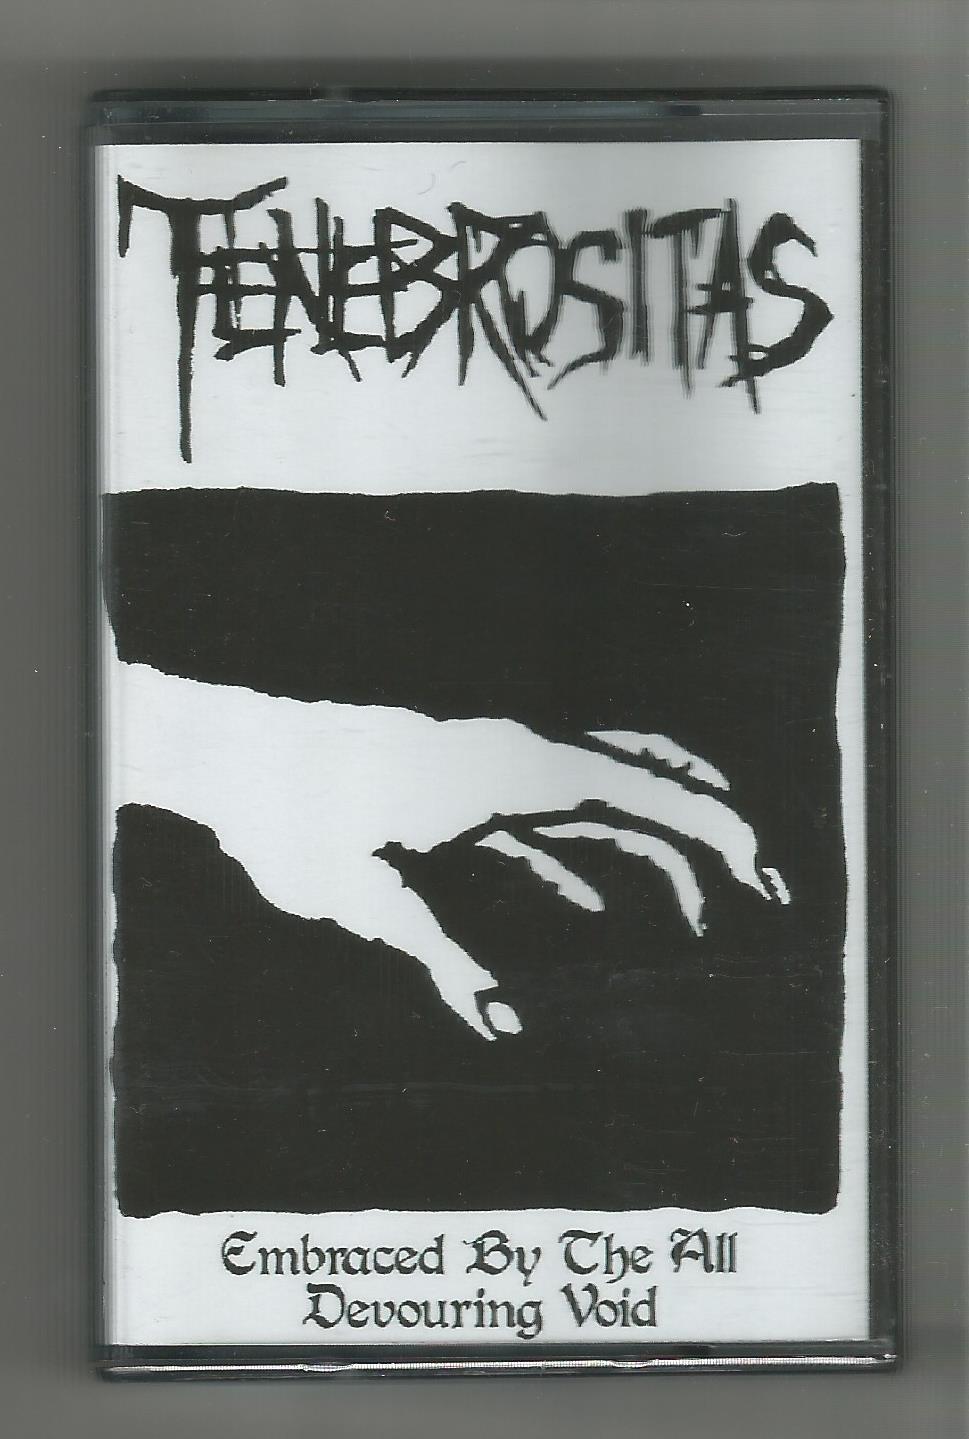 Tenebrositas - Embraced By The All Devouring Void 